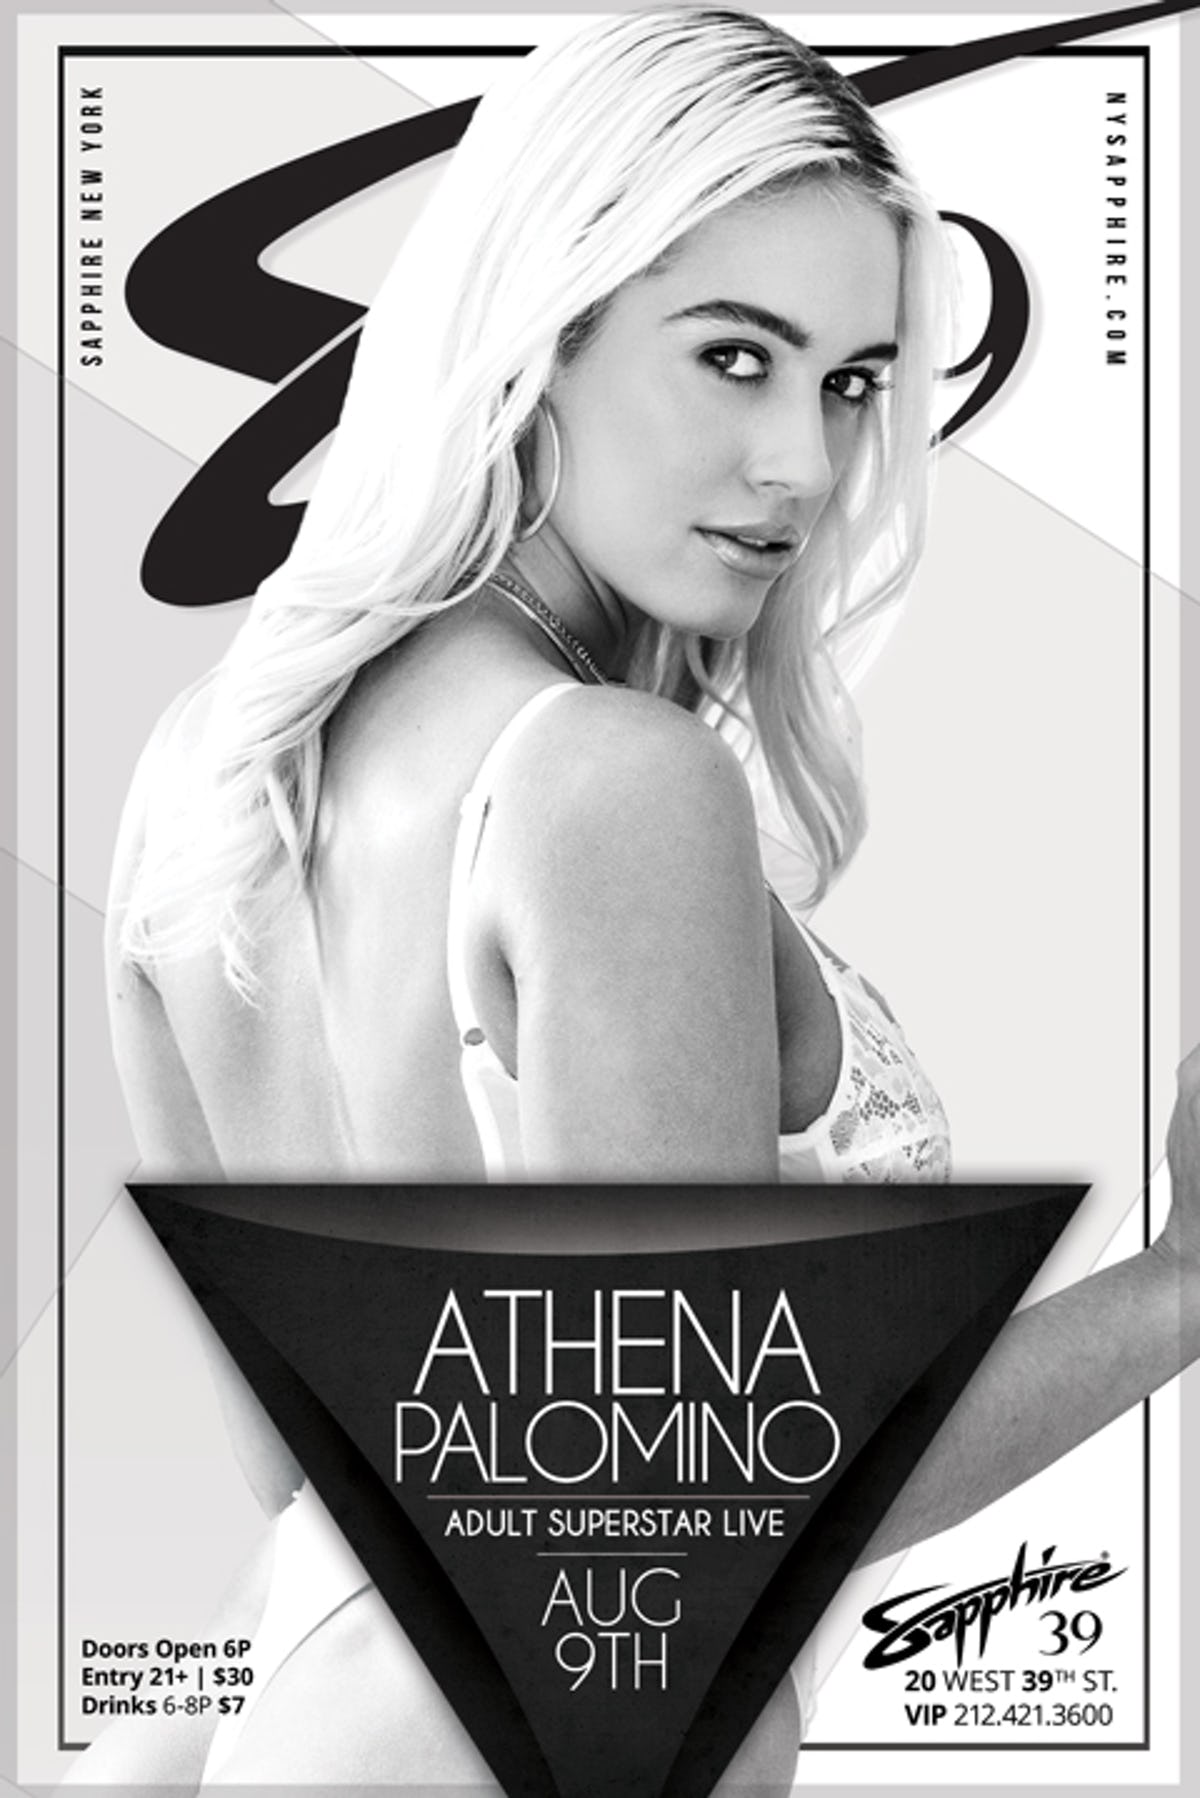 Tablelist | Buy Tickets and Tables to Athena Palomino Thursday 8.9.18 at  Sapphire 39 at Sapphire 39